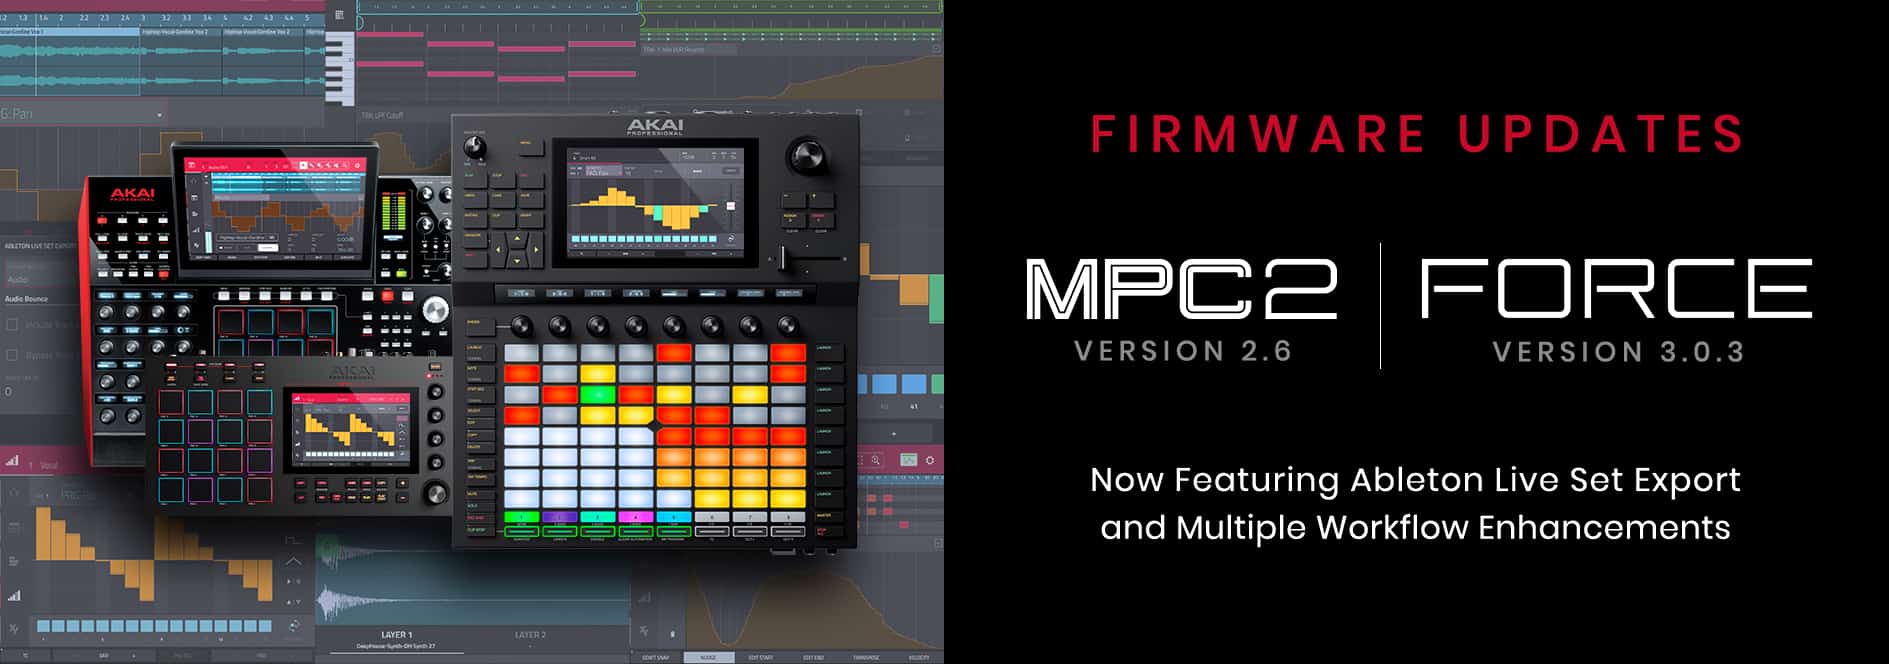 3.0.3 Firmware Update for Force and 2.6 Firmware update for MPC X and MPC Live